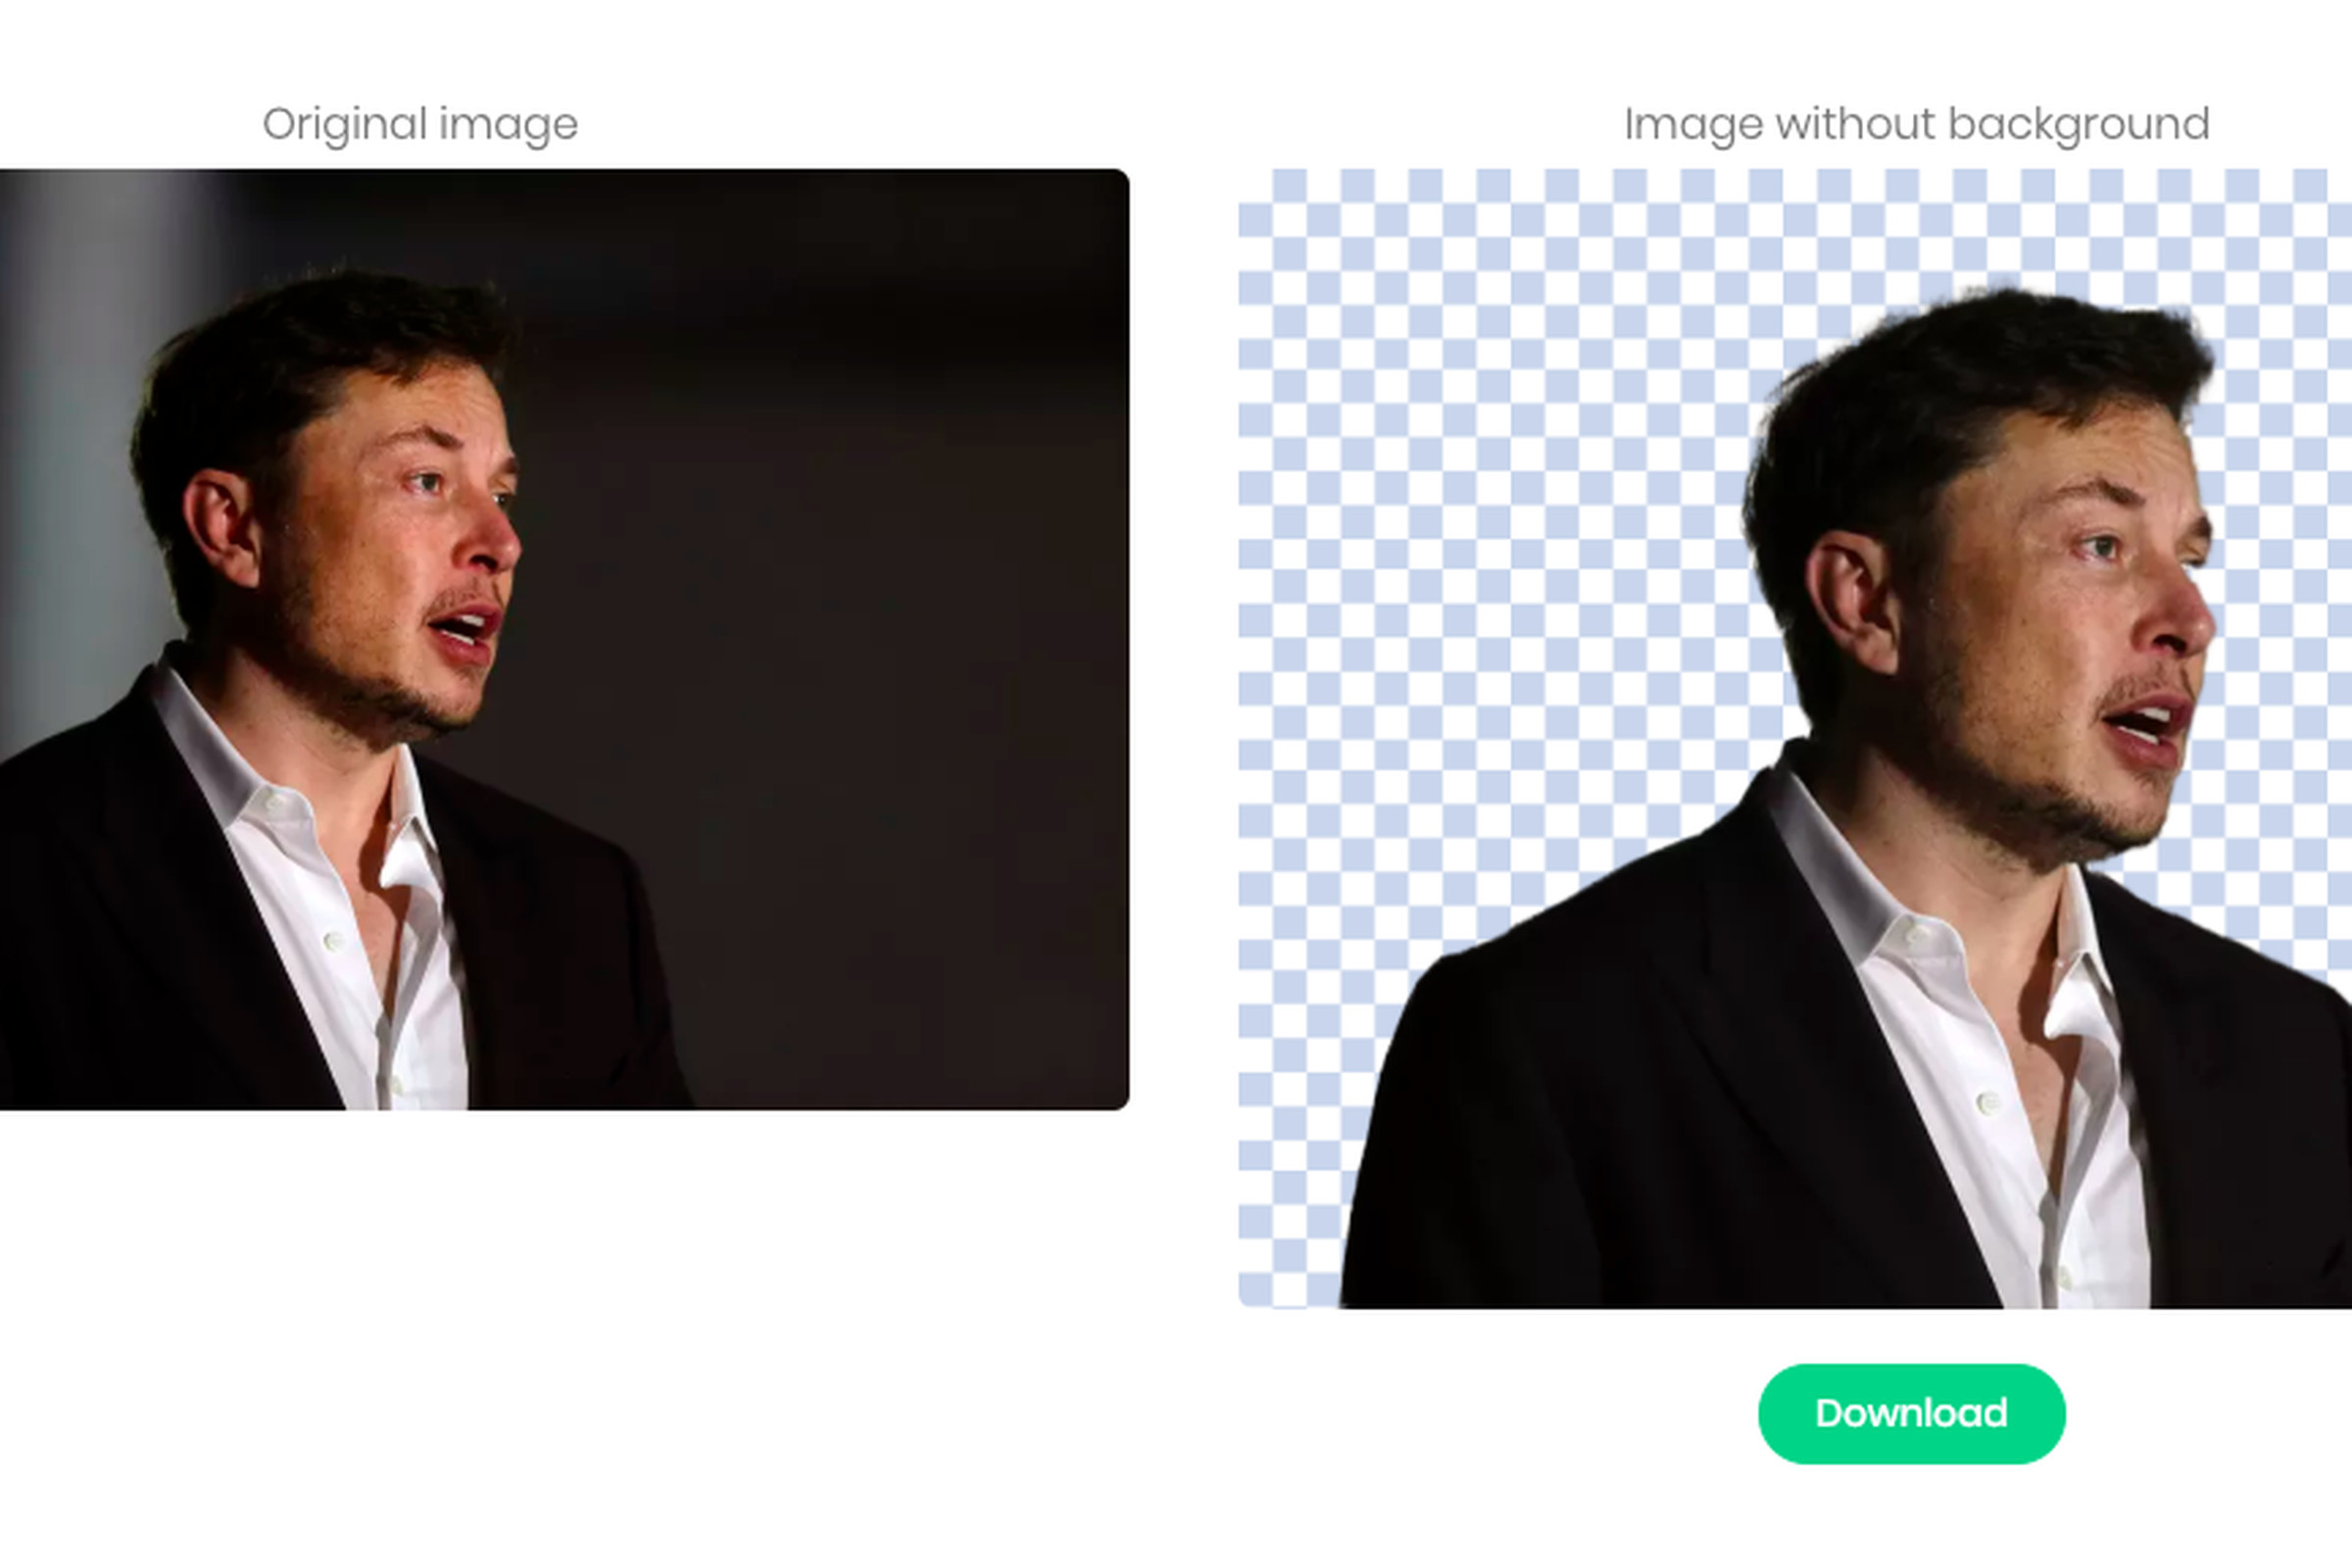 Remove.bg is a quick way to edit out a picture’s background. But it does make mistakes — just look at Elon Musk’s missing chunk of eye in the image on the right. 